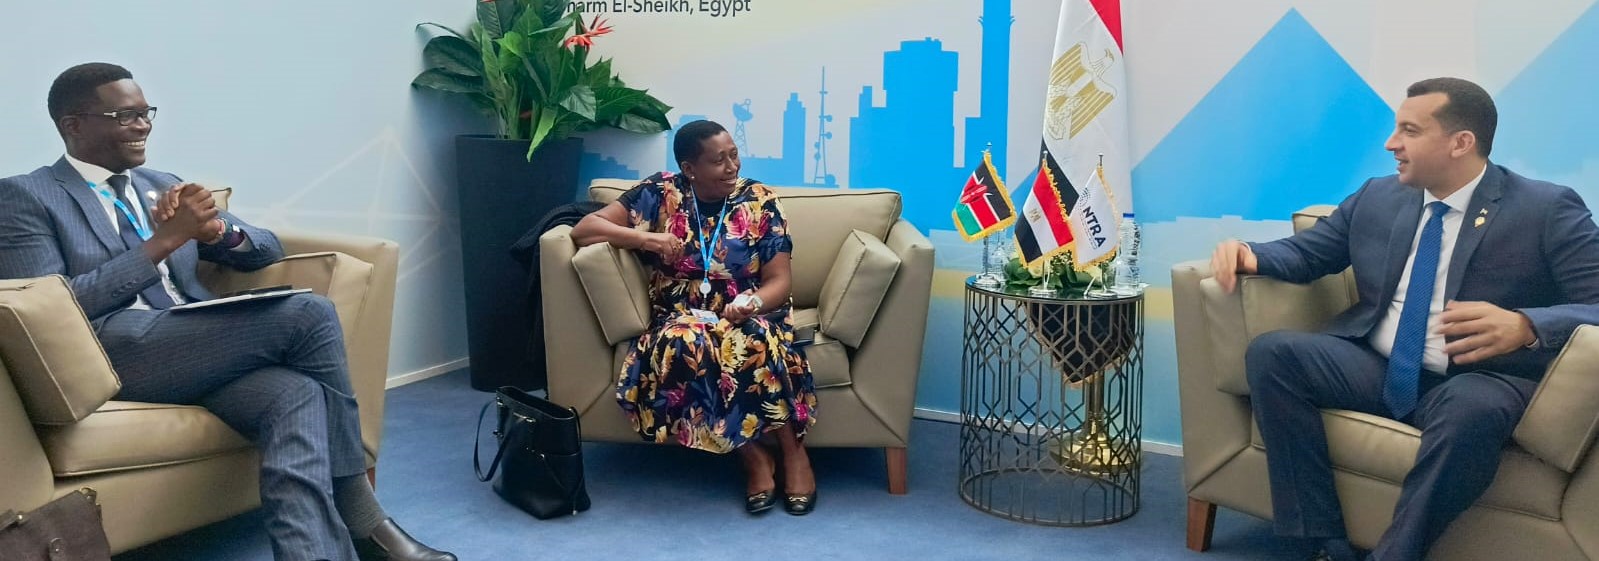 CA Board Chairperson Ms. Mary Mungai (centre) with Eng. Hossam El Gamal, the Executive President of the National Telecommunication Regulatory Authority (NTRA) of Egypt (right) on the sidelines of the Global Symposium of Regulators in Sharm El Sheikh. 